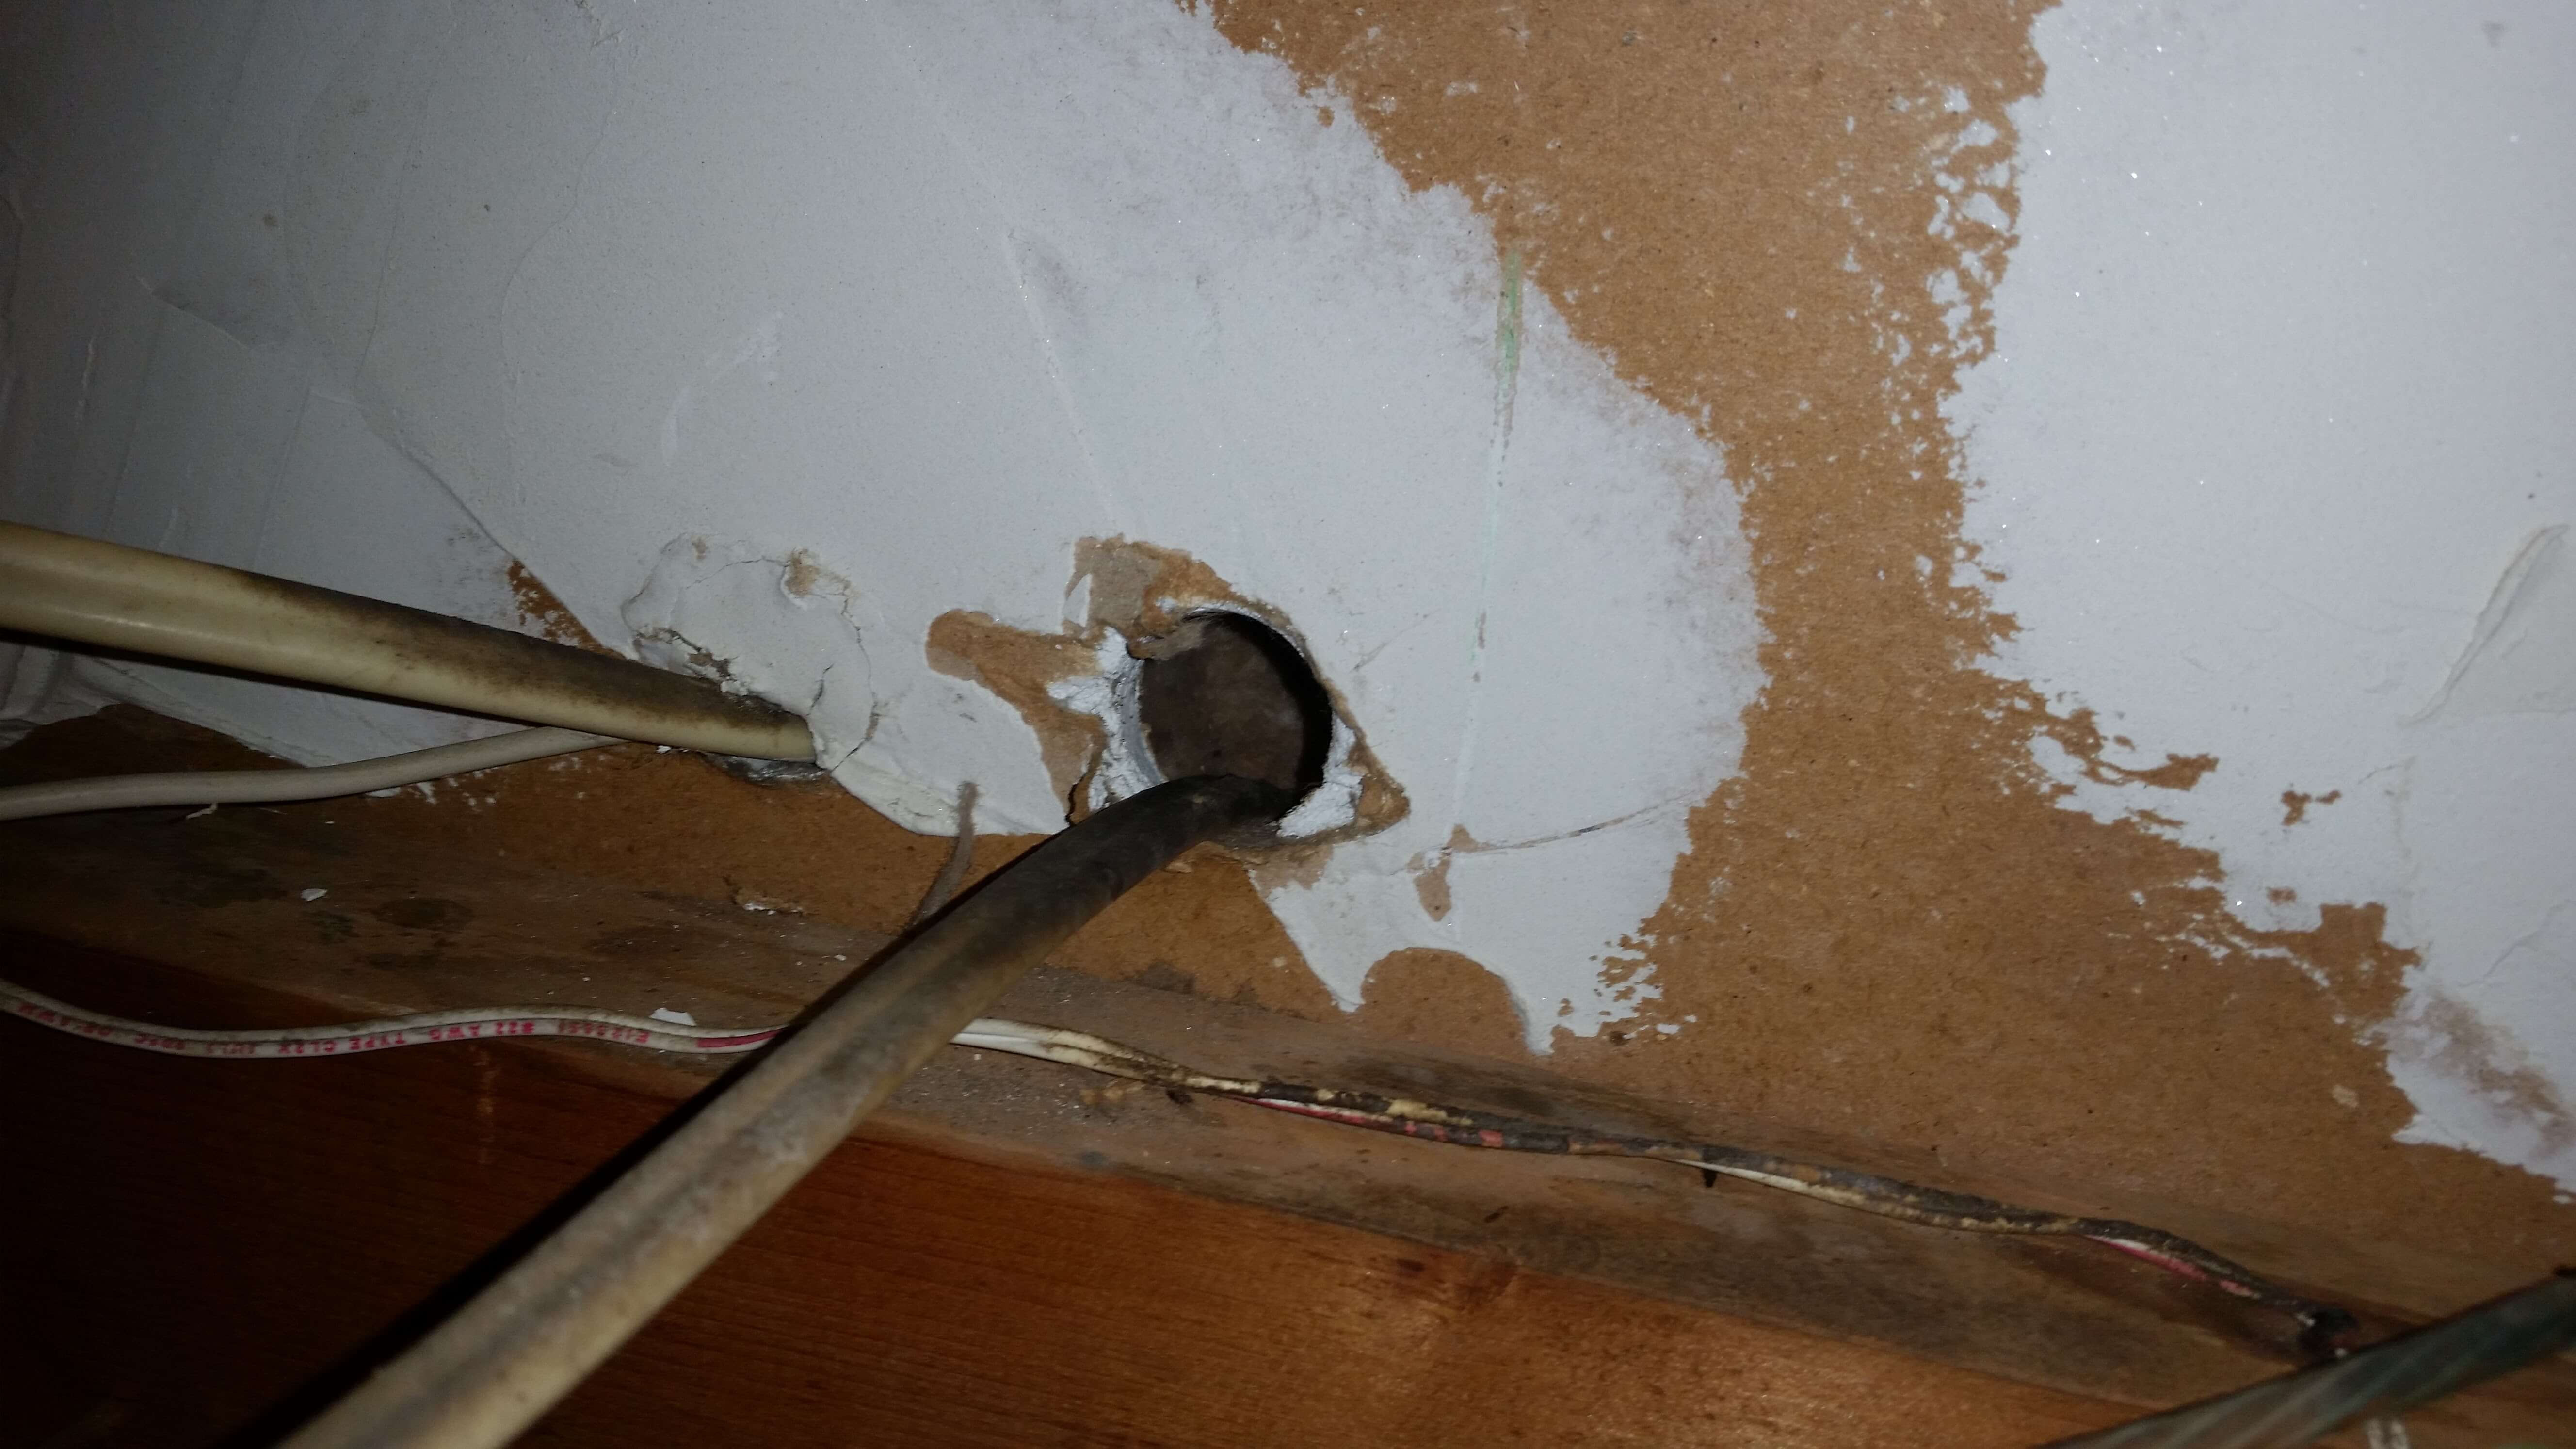 Mouse Removal Tips Getting Rid Of Mice From Your Home Garage